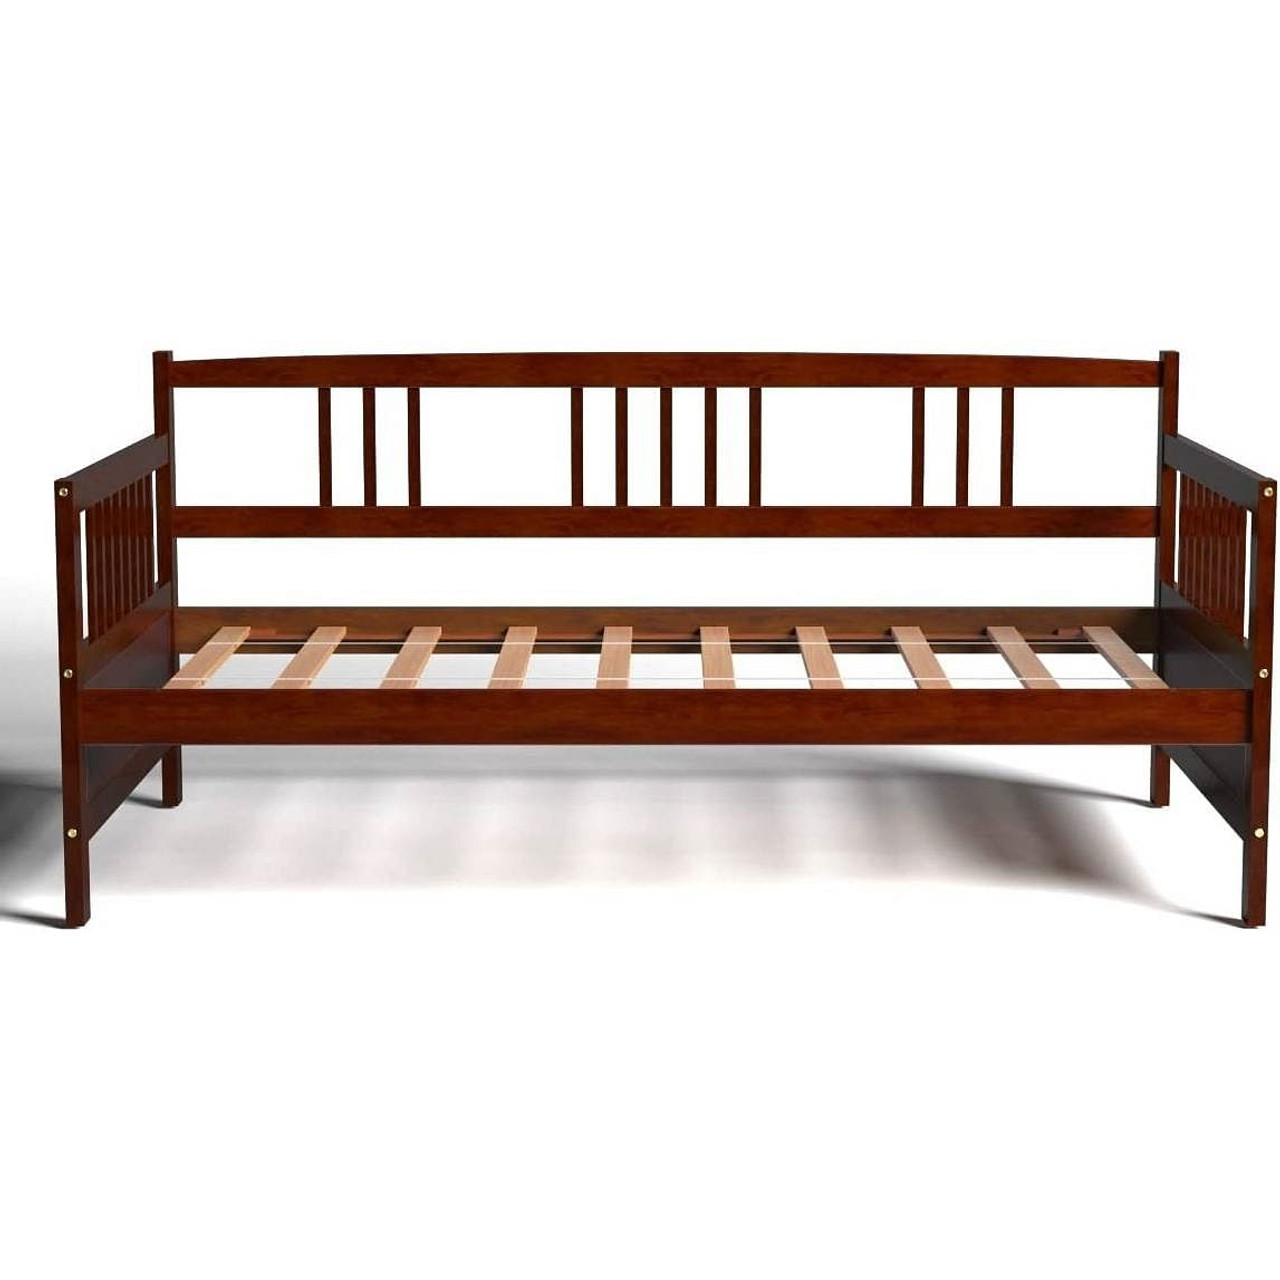 Twin size 2-in-1 Wood Daybed Frame Sofa Bed in Brown Cherry Finish